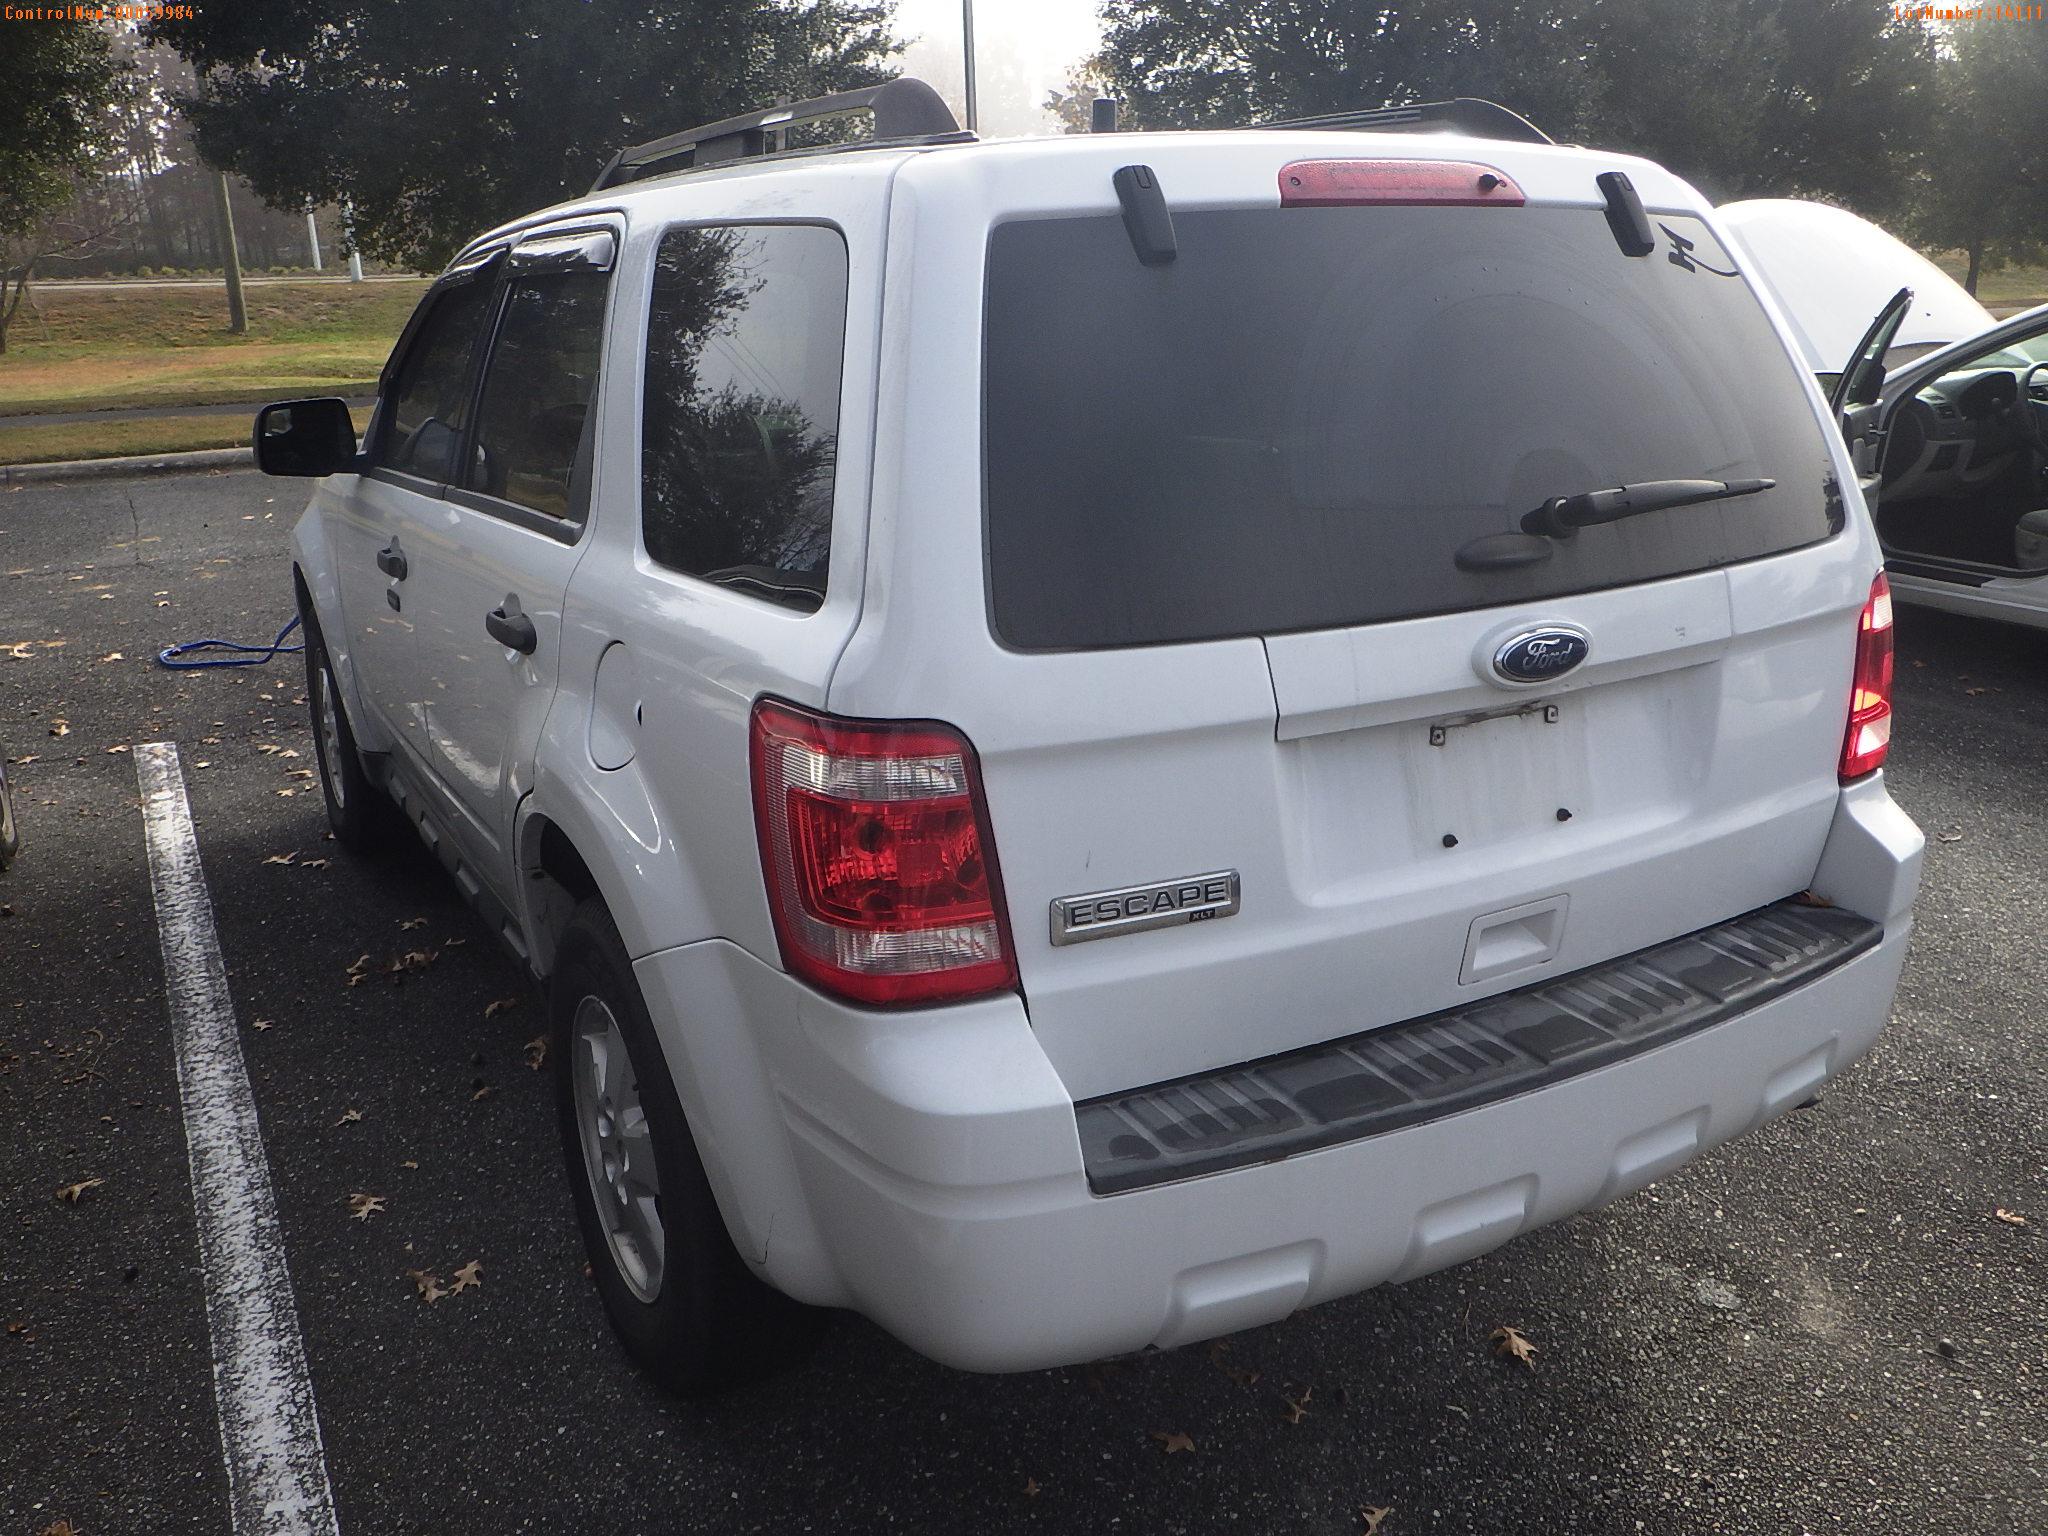 12-14111 (Cars-SUV 4D)  Seller: Florida State D.M.S. 2011 FORD ESCAPE